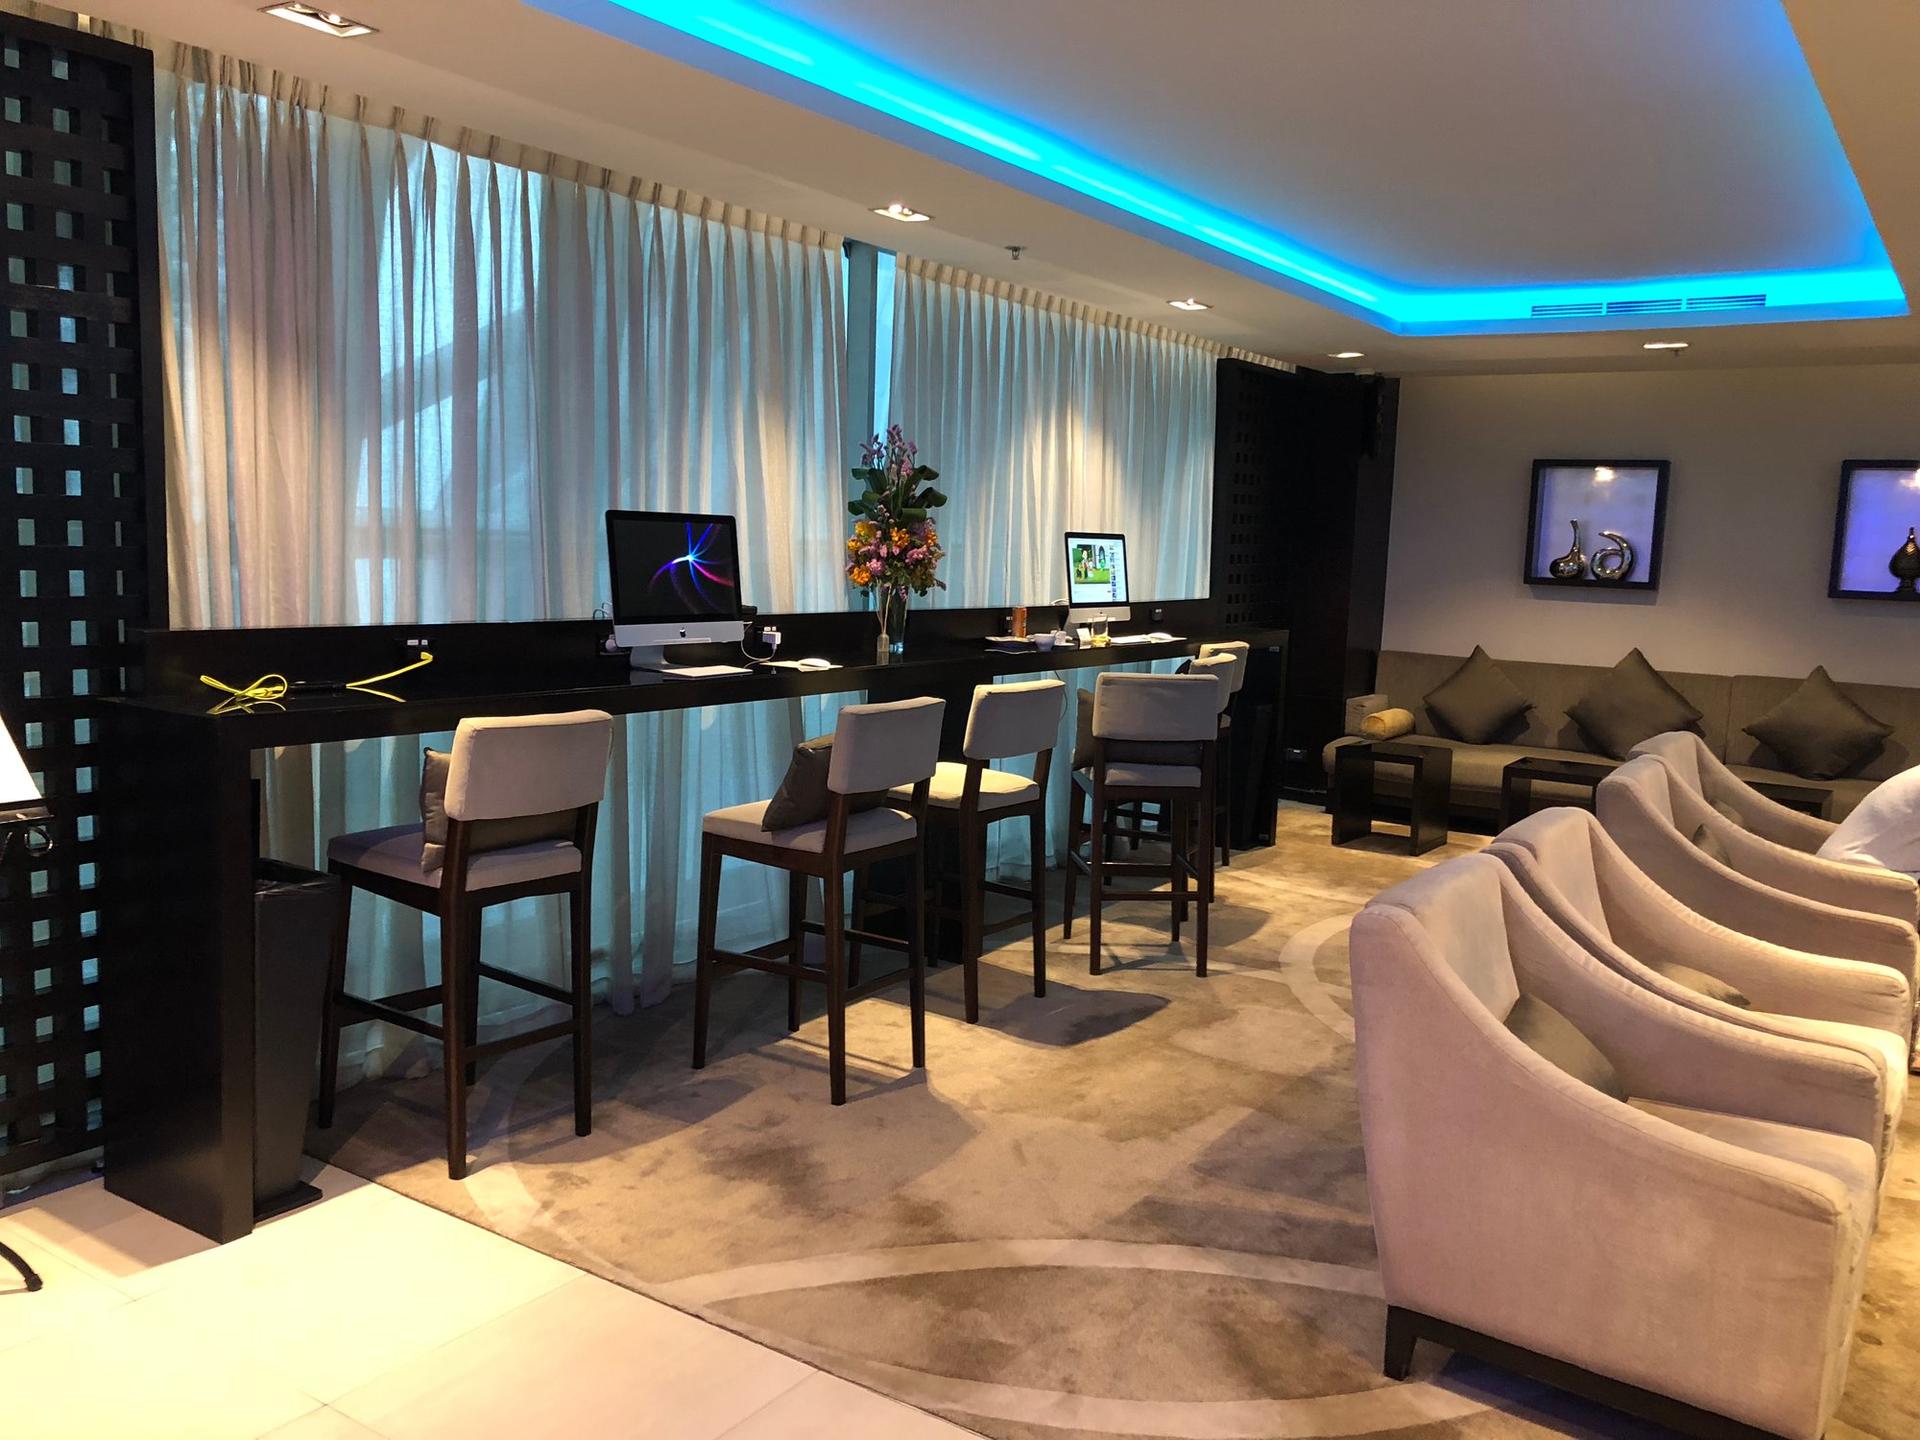 Oman Air First and Business Class Lounge image 10 of 50